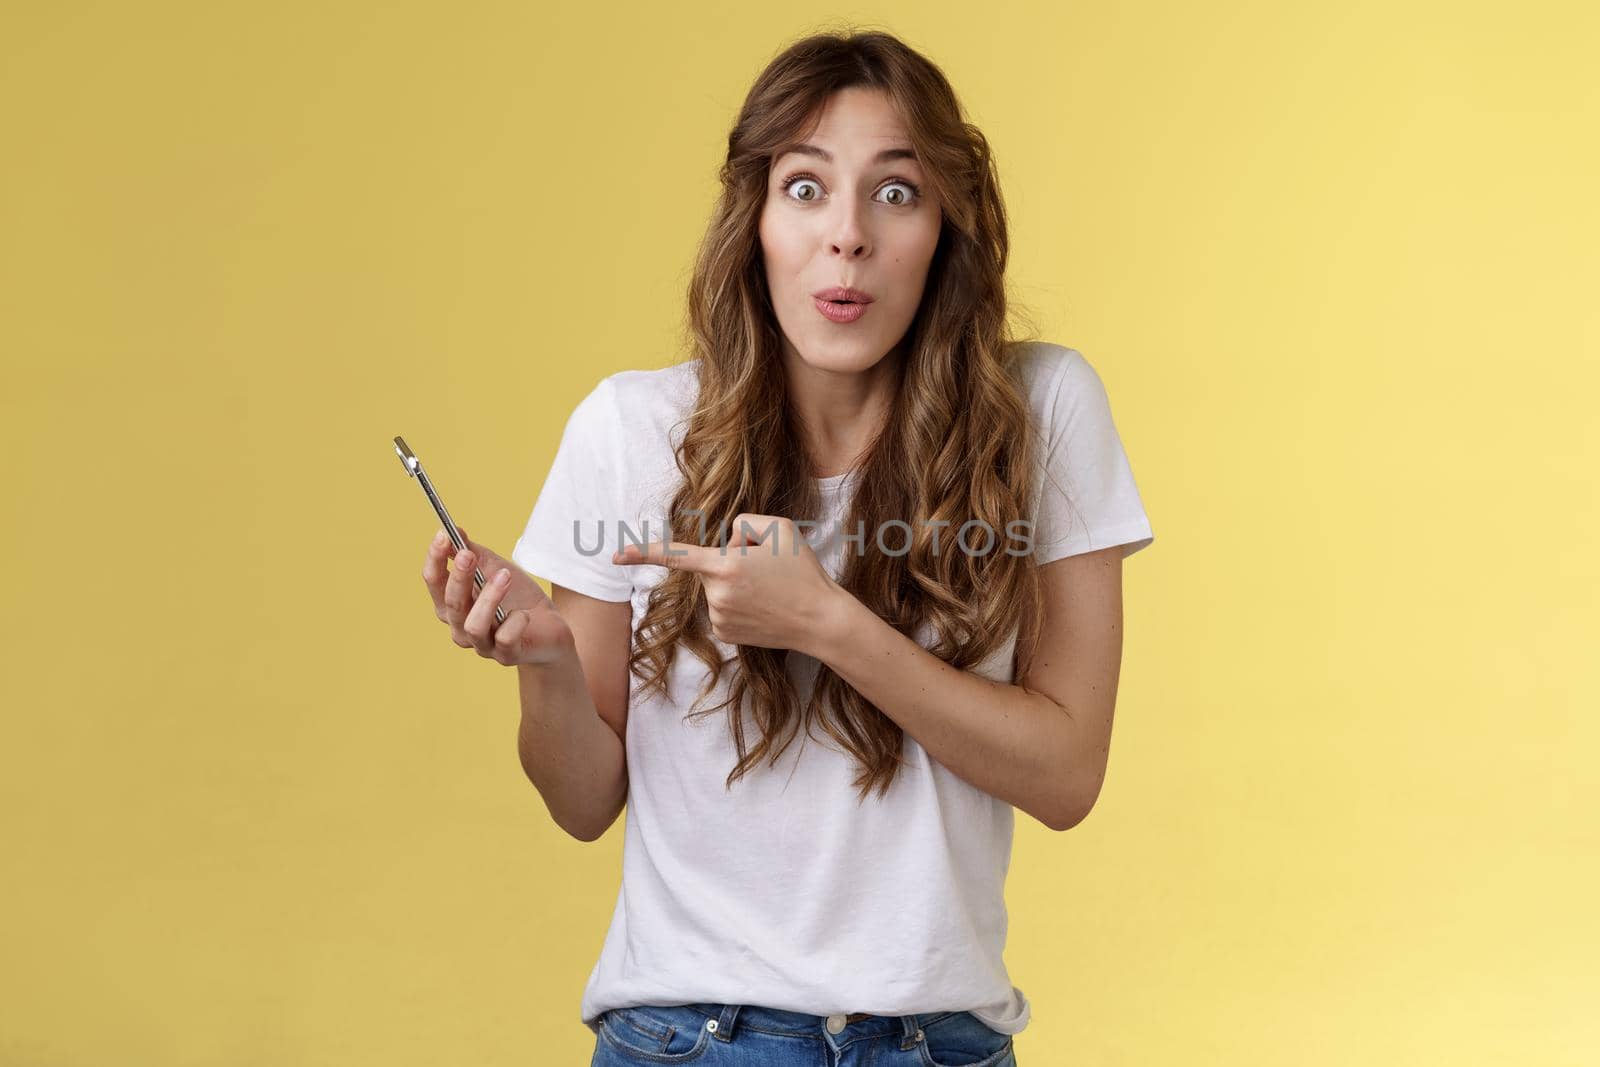 Impressed enthusiastic good-looking girl curly cute hairstyle folding lips amused wow stare camera astonished hold smartphone pointing mobile phone speak about awesome news yellow background. Lifestyle.